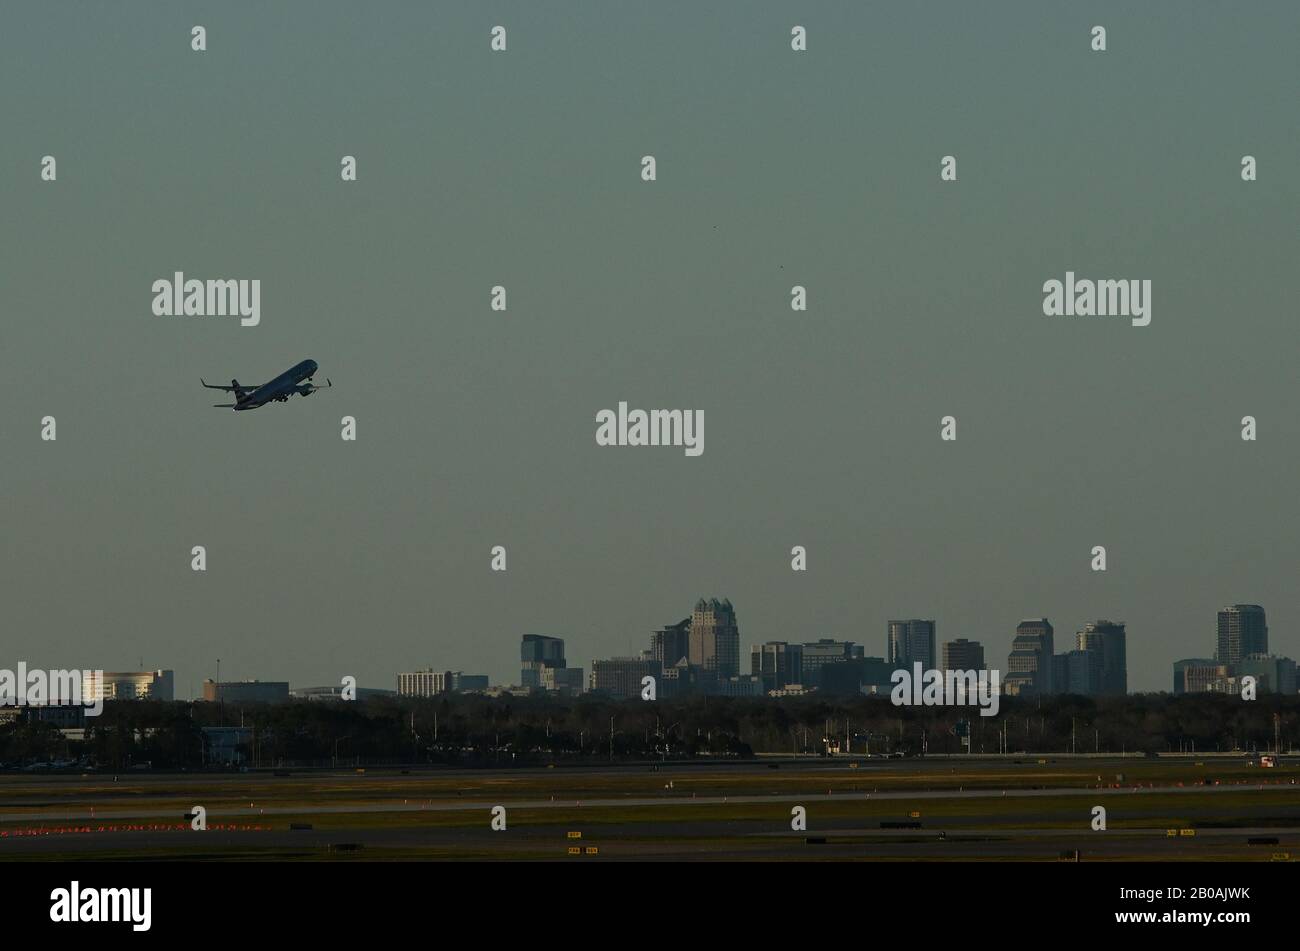 An airplane takes off at Orlando International Airport with downtown Orlando skyline in the background. Stock Photo